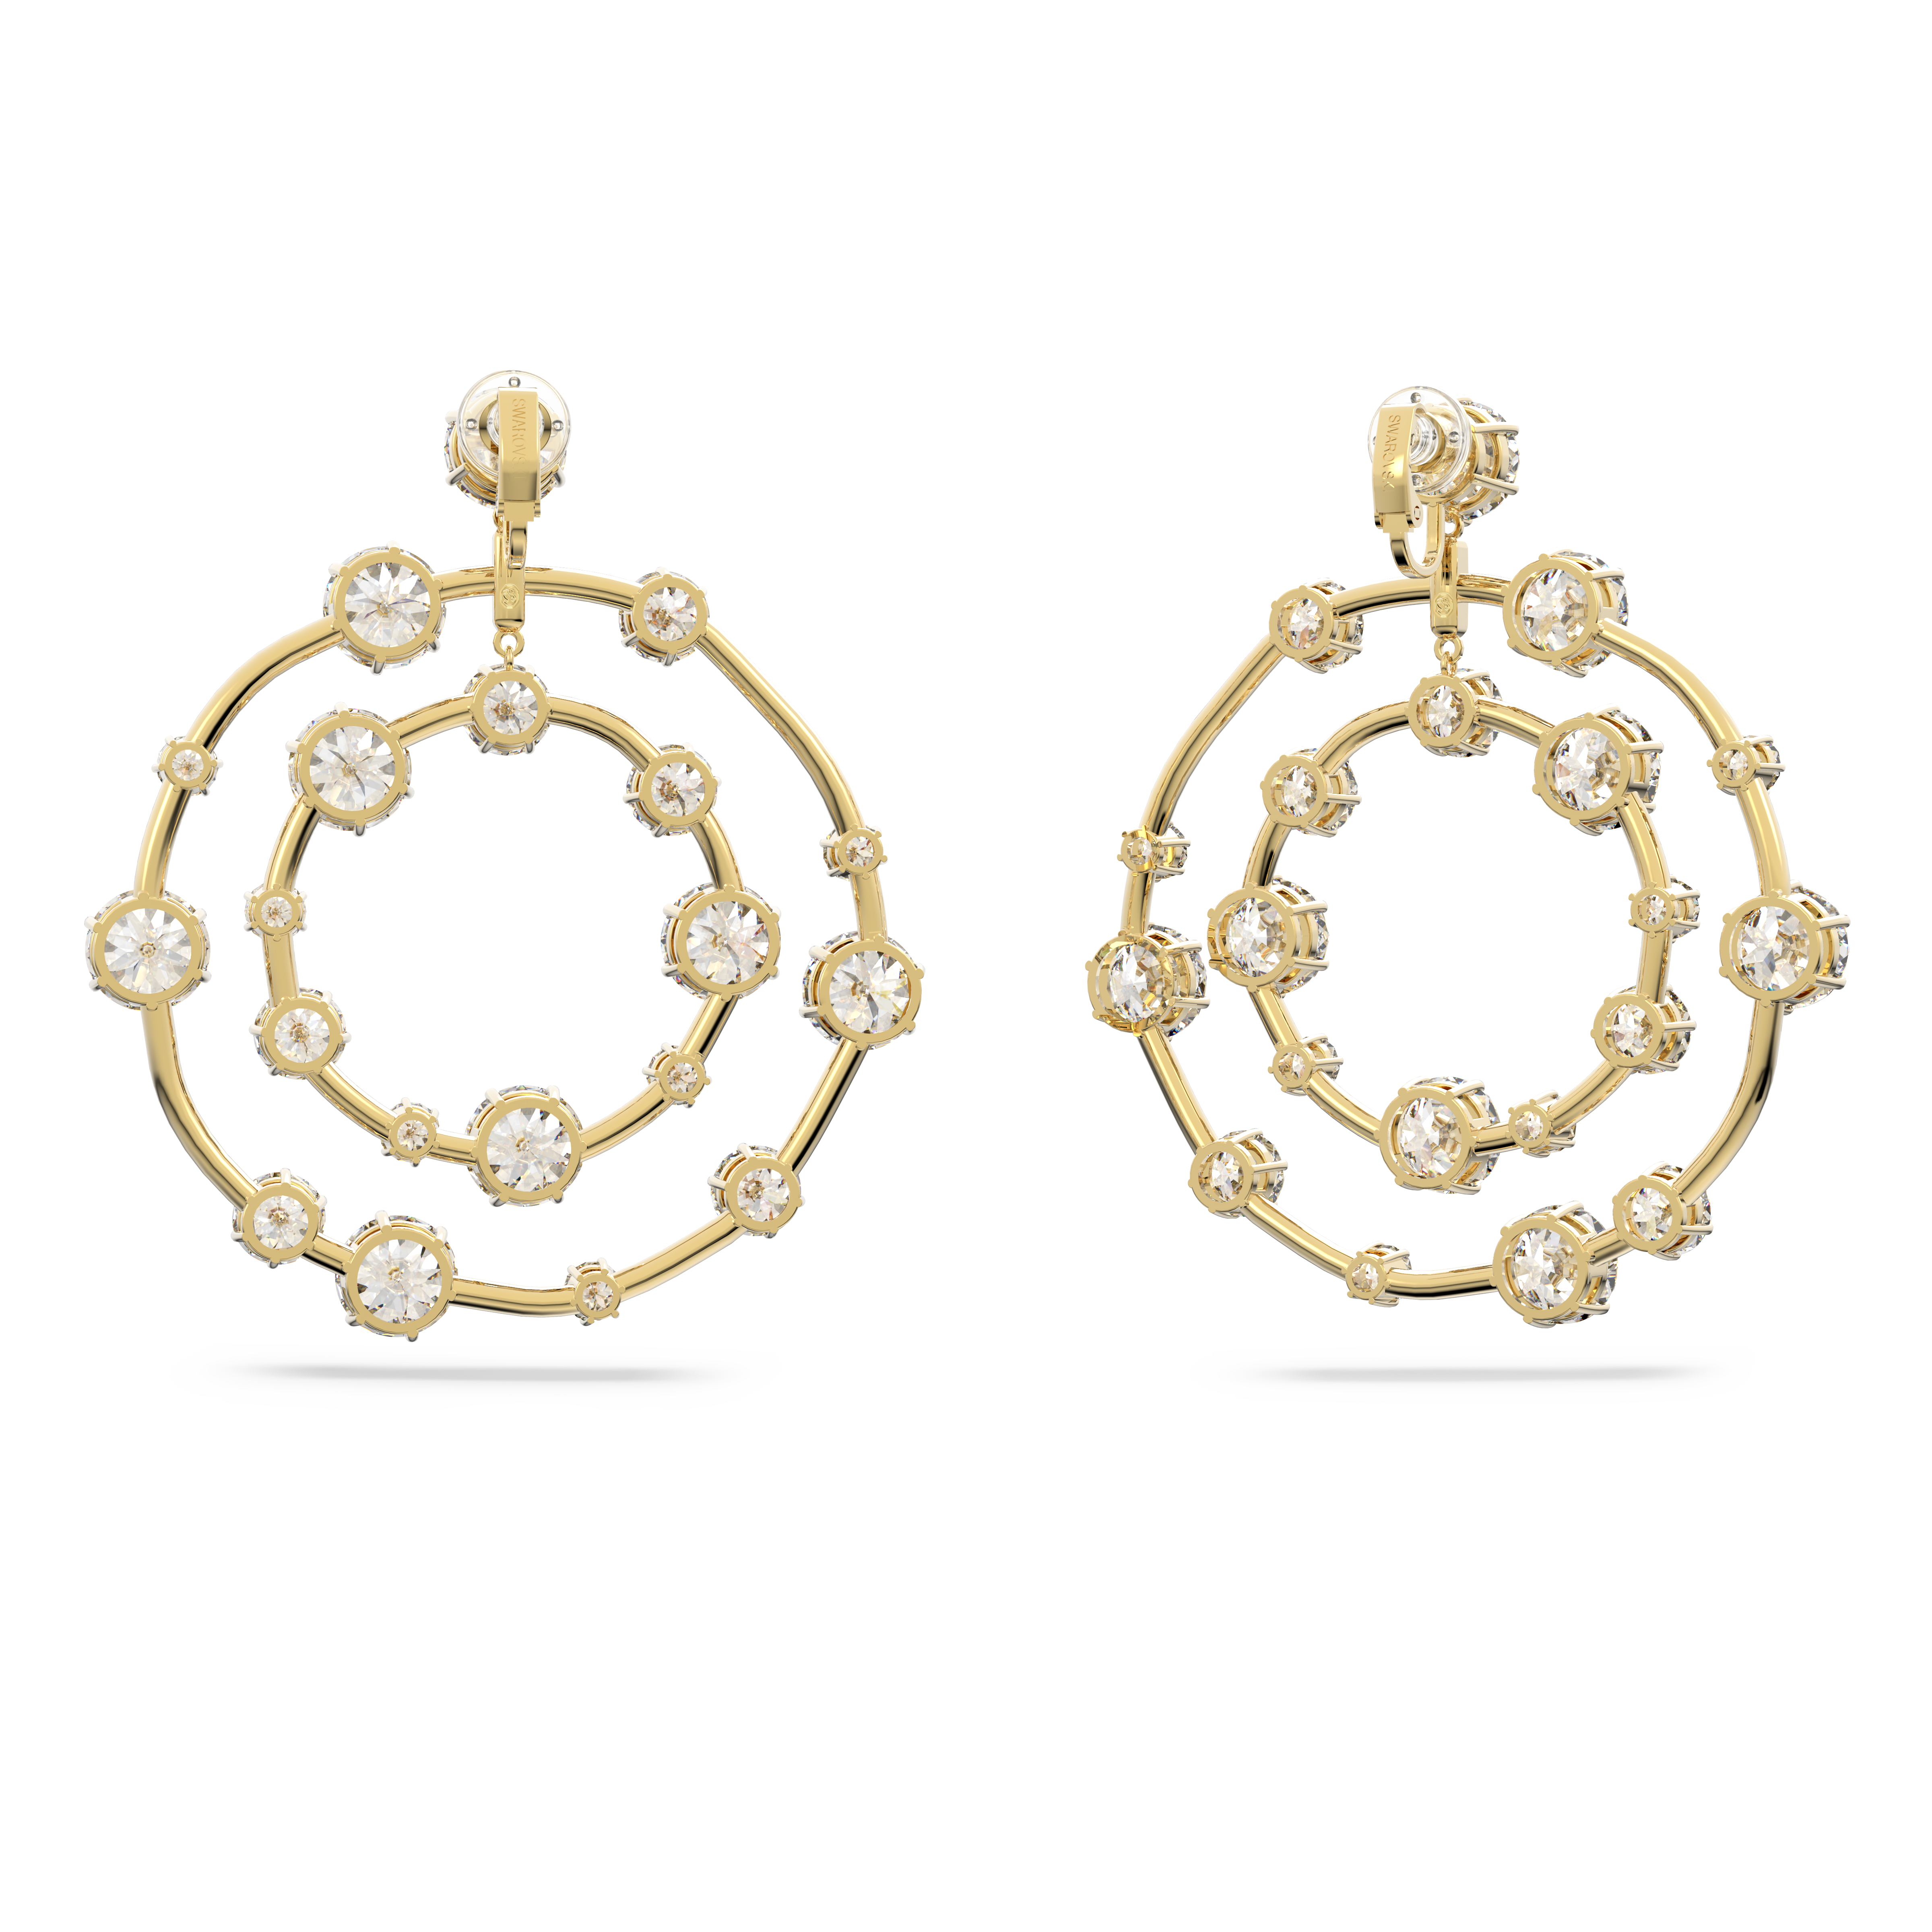 Constella clip earrings, Round cut, White, Gold-tone plated by SWAROVSKI